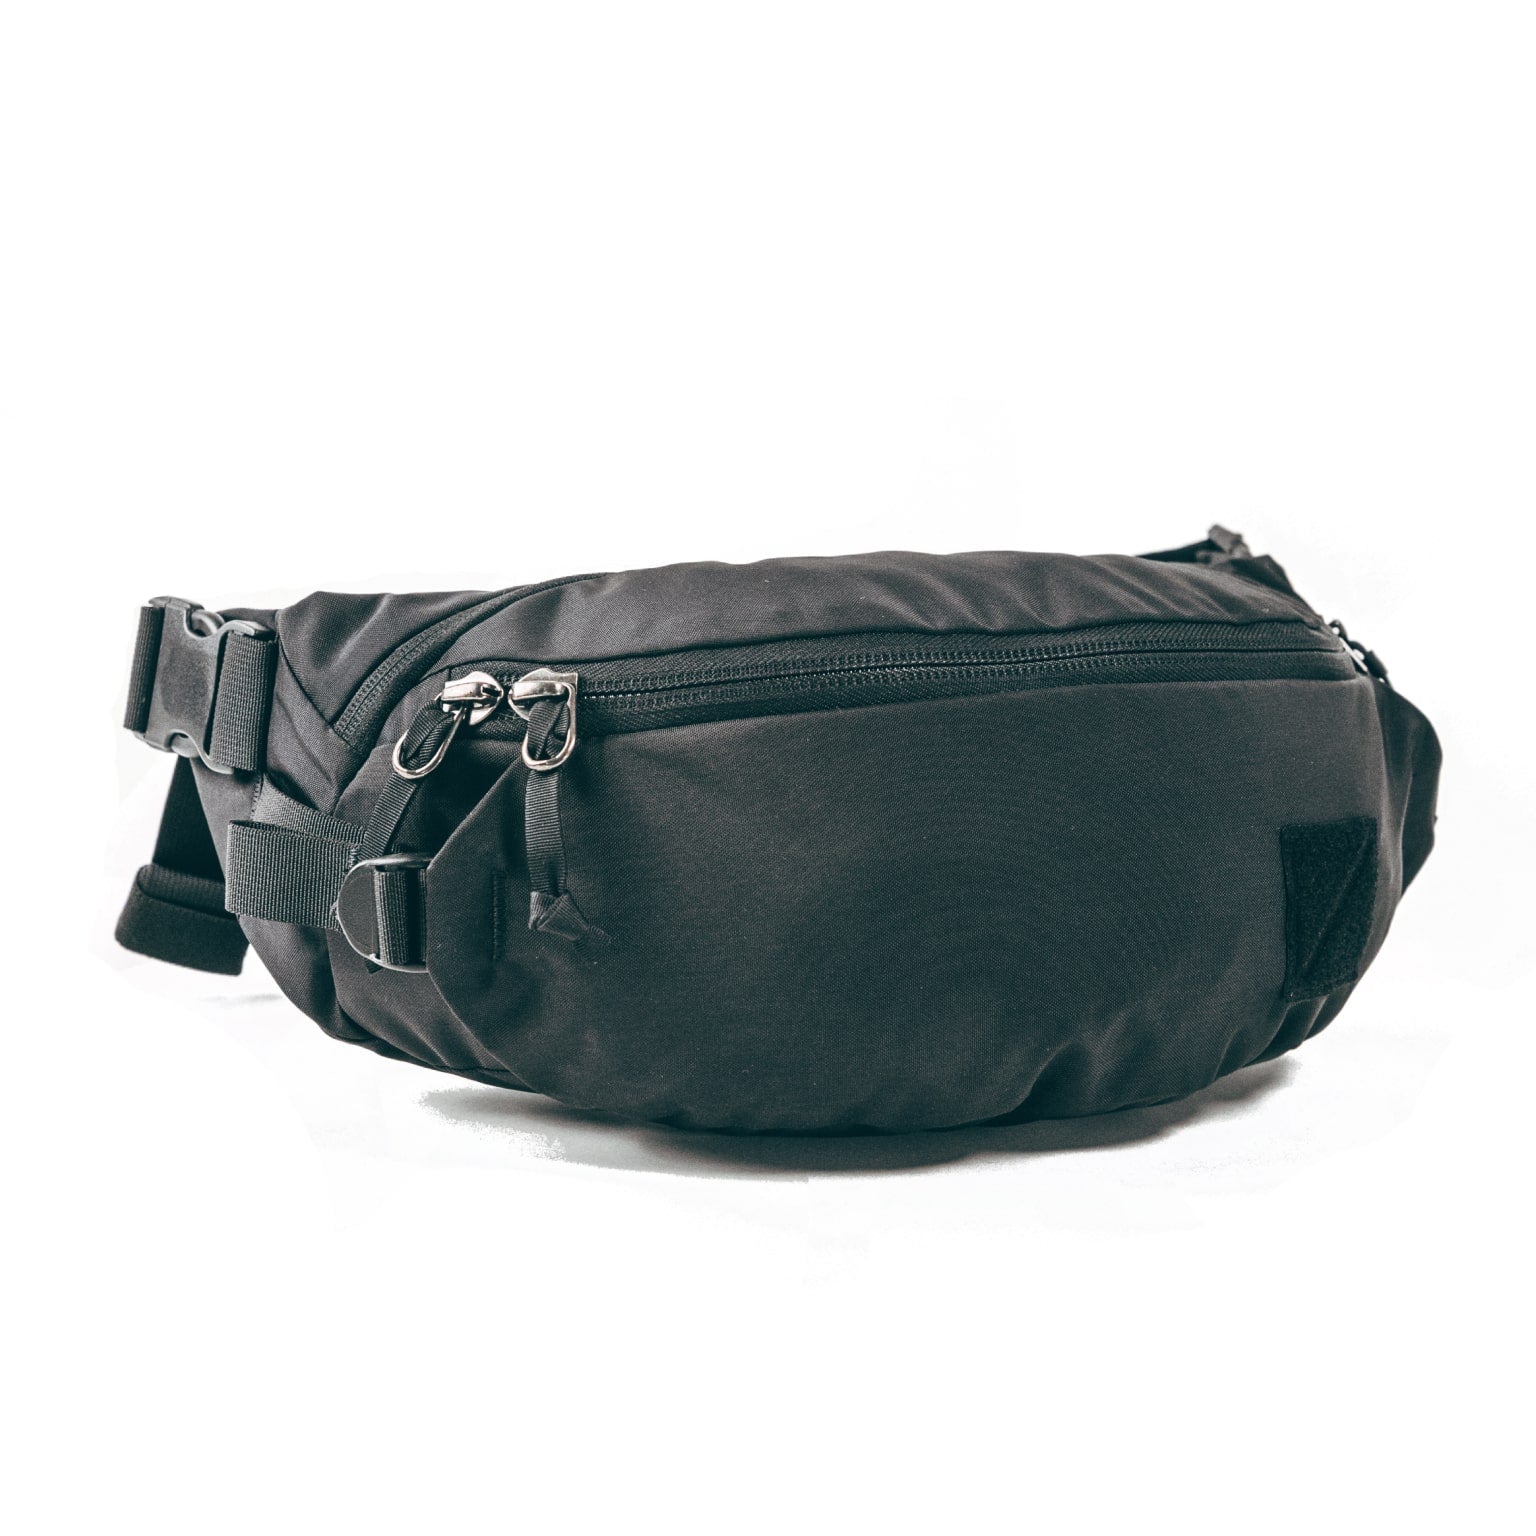 How To Wear A Fanny Pack - Top 5 Fanny Packs - V-Style